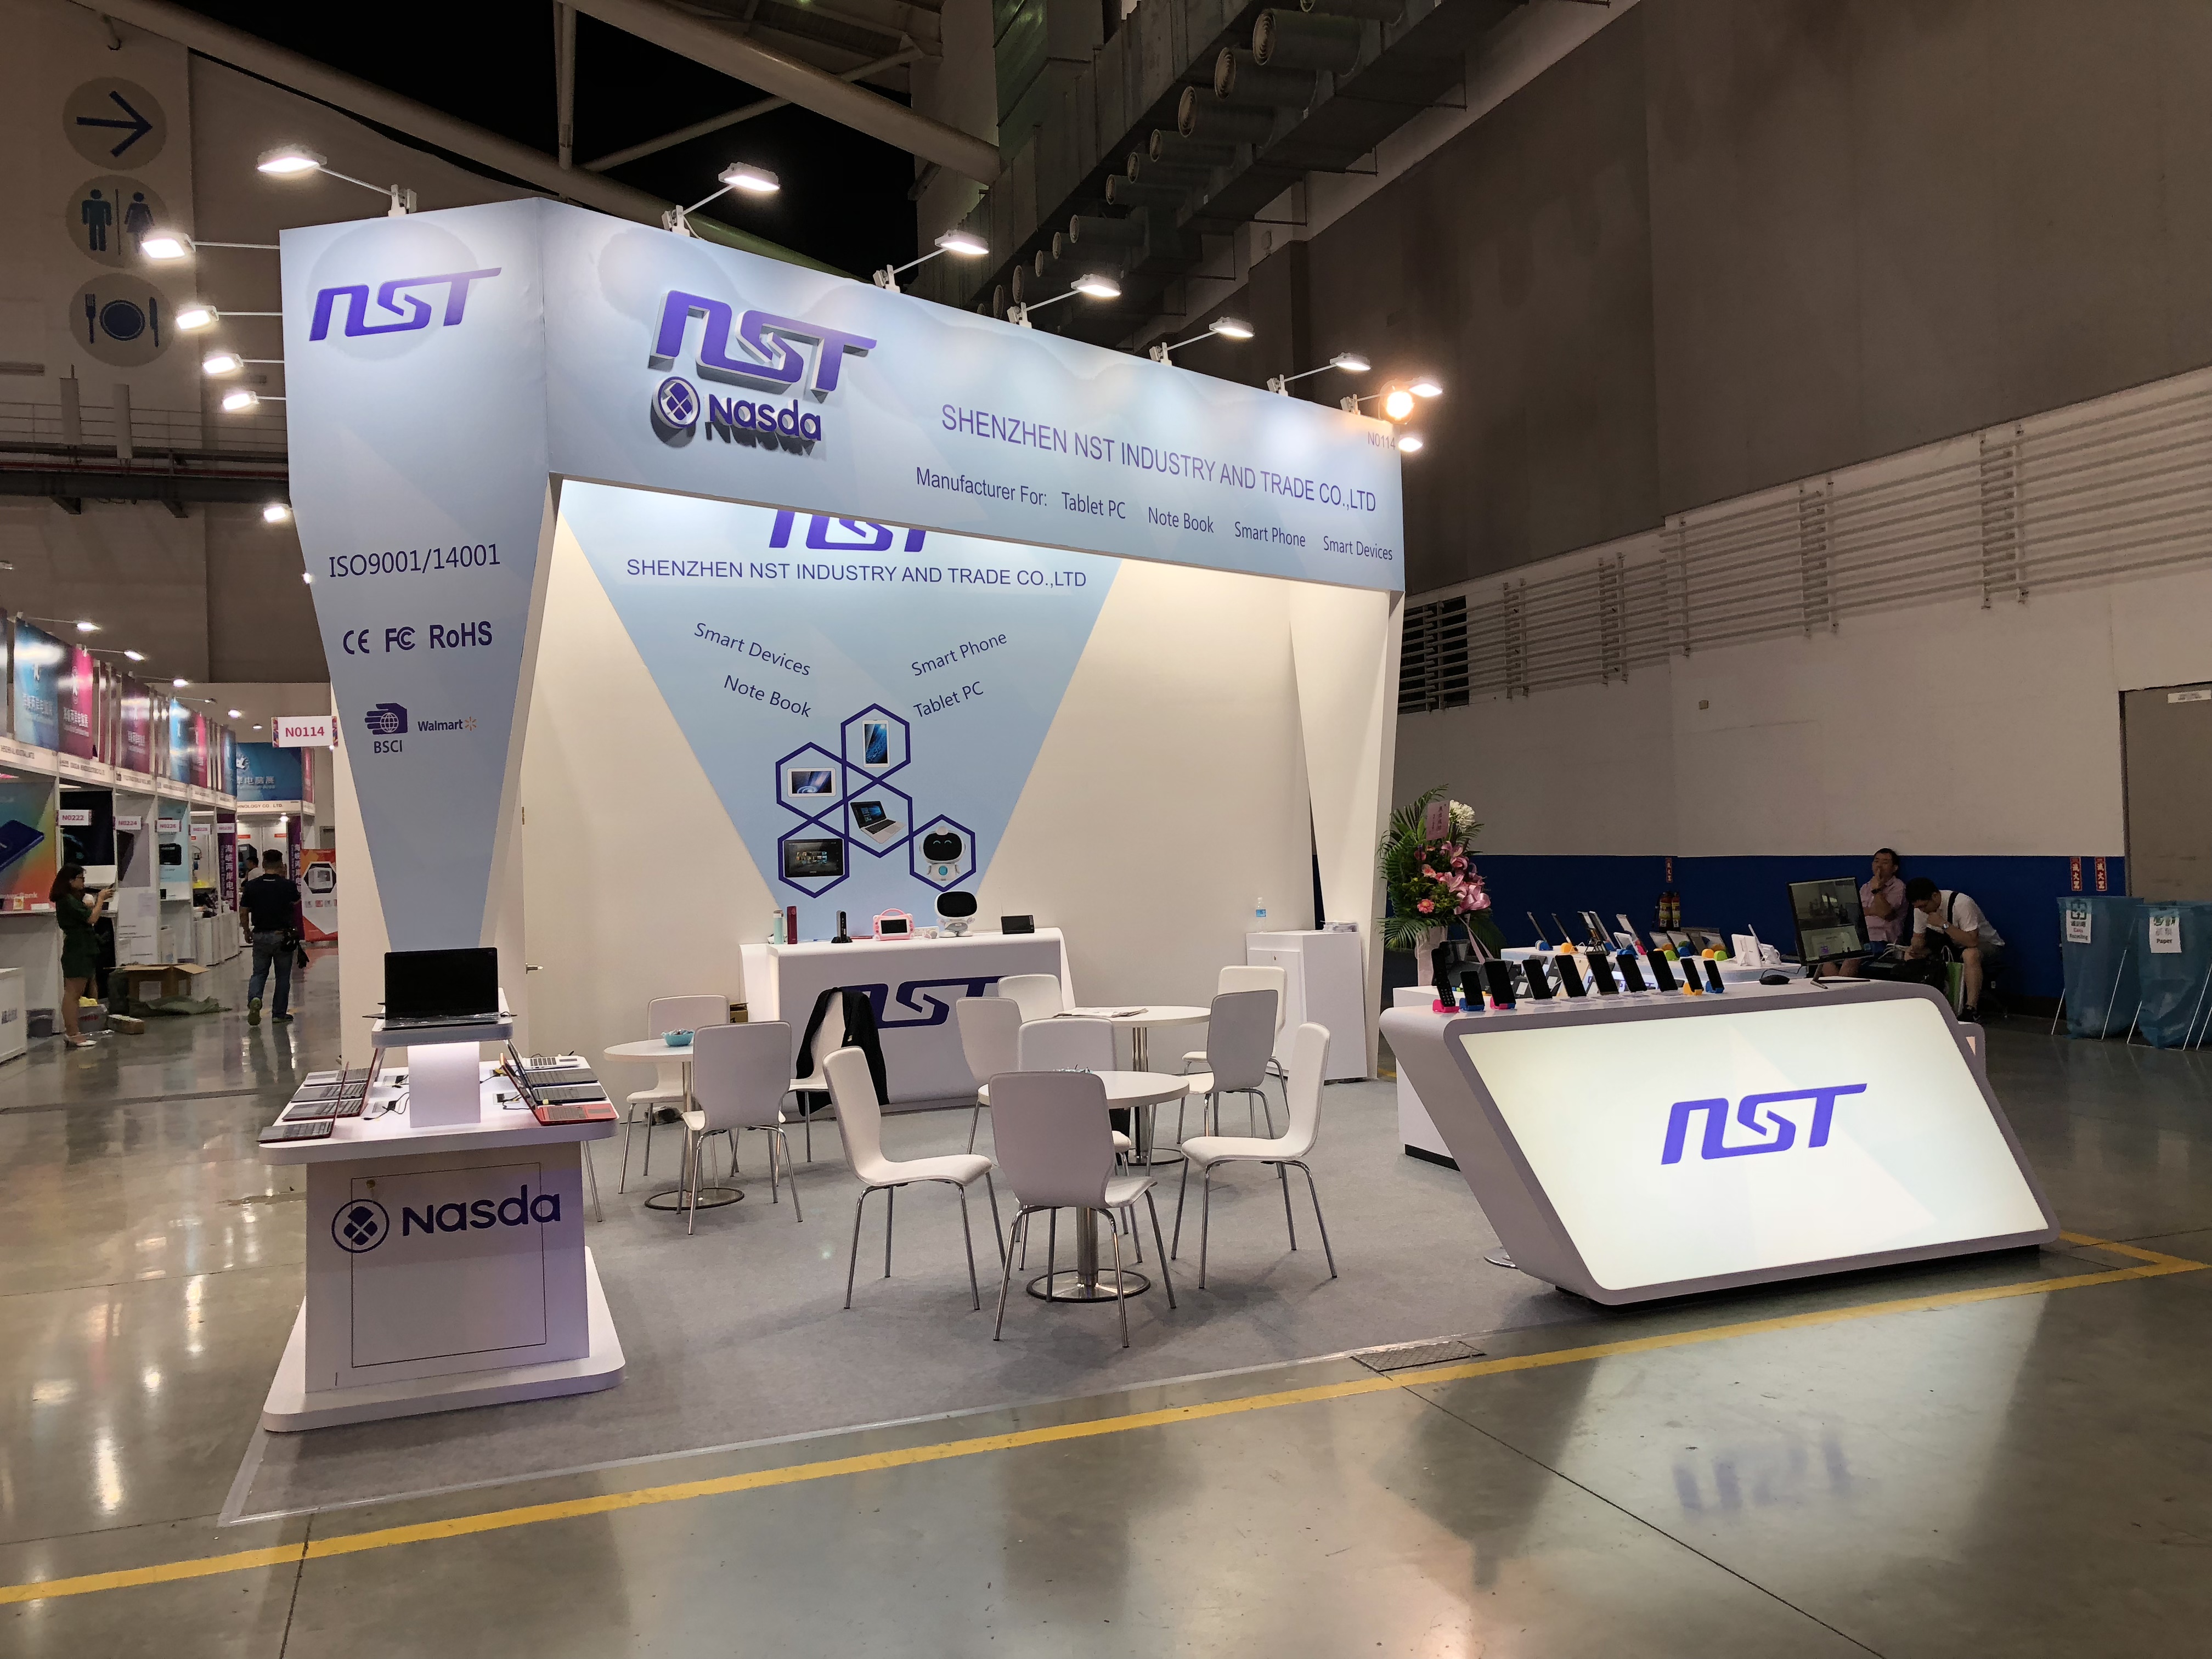 Booth site N0114 